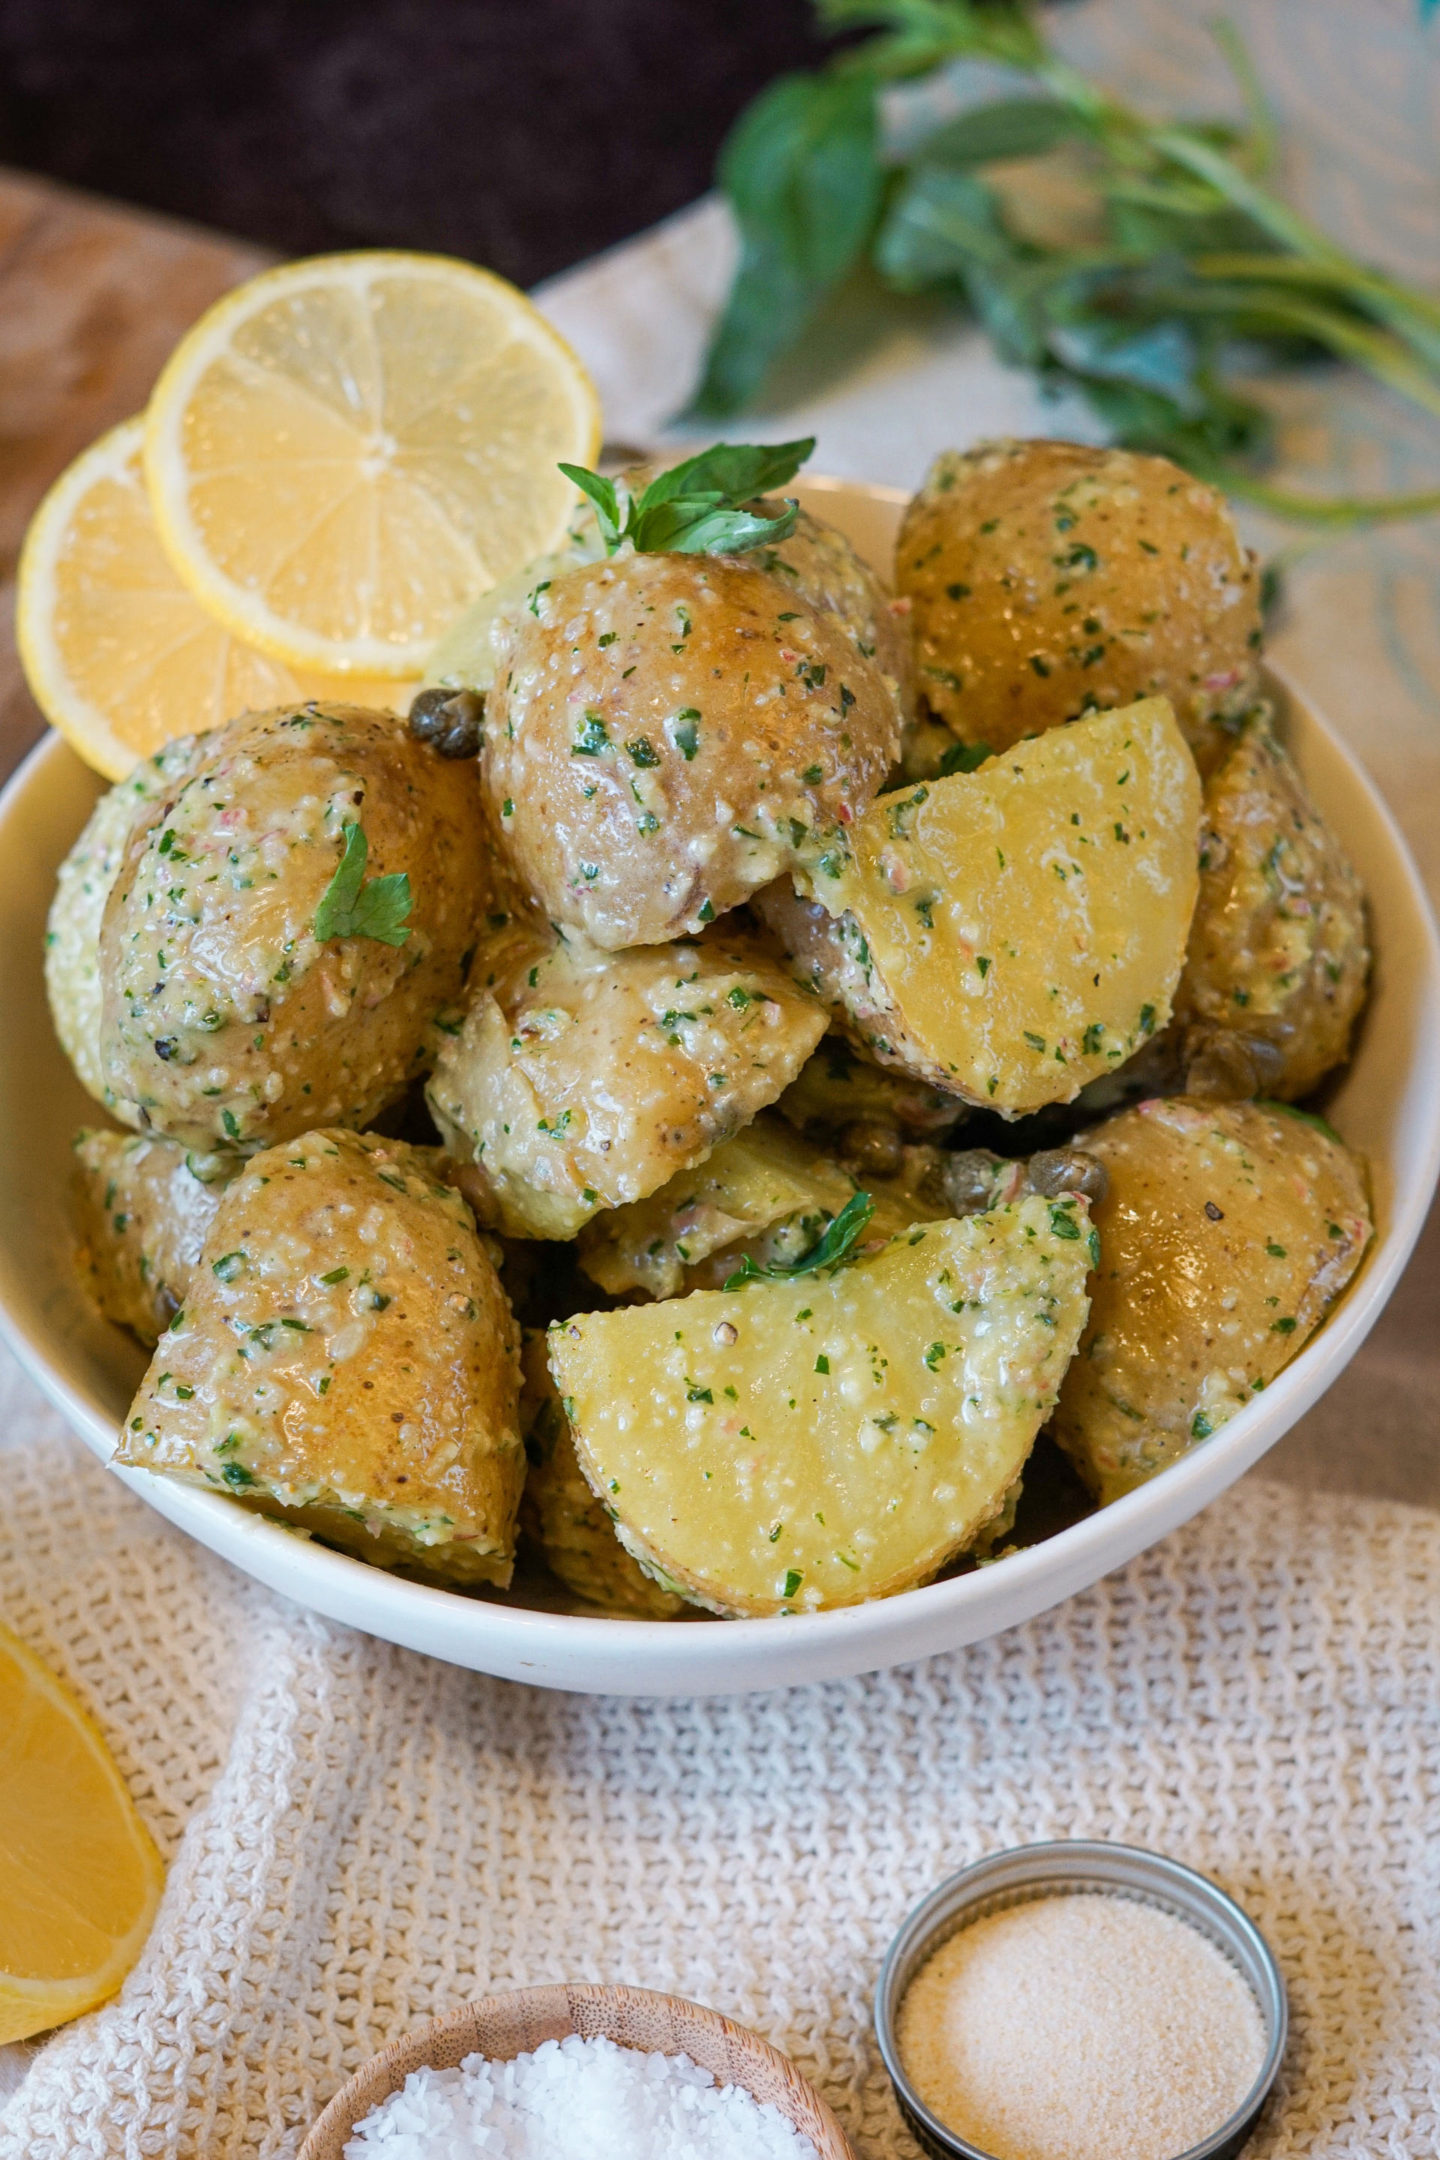 potato salad with lemons and herbs in a white bowl